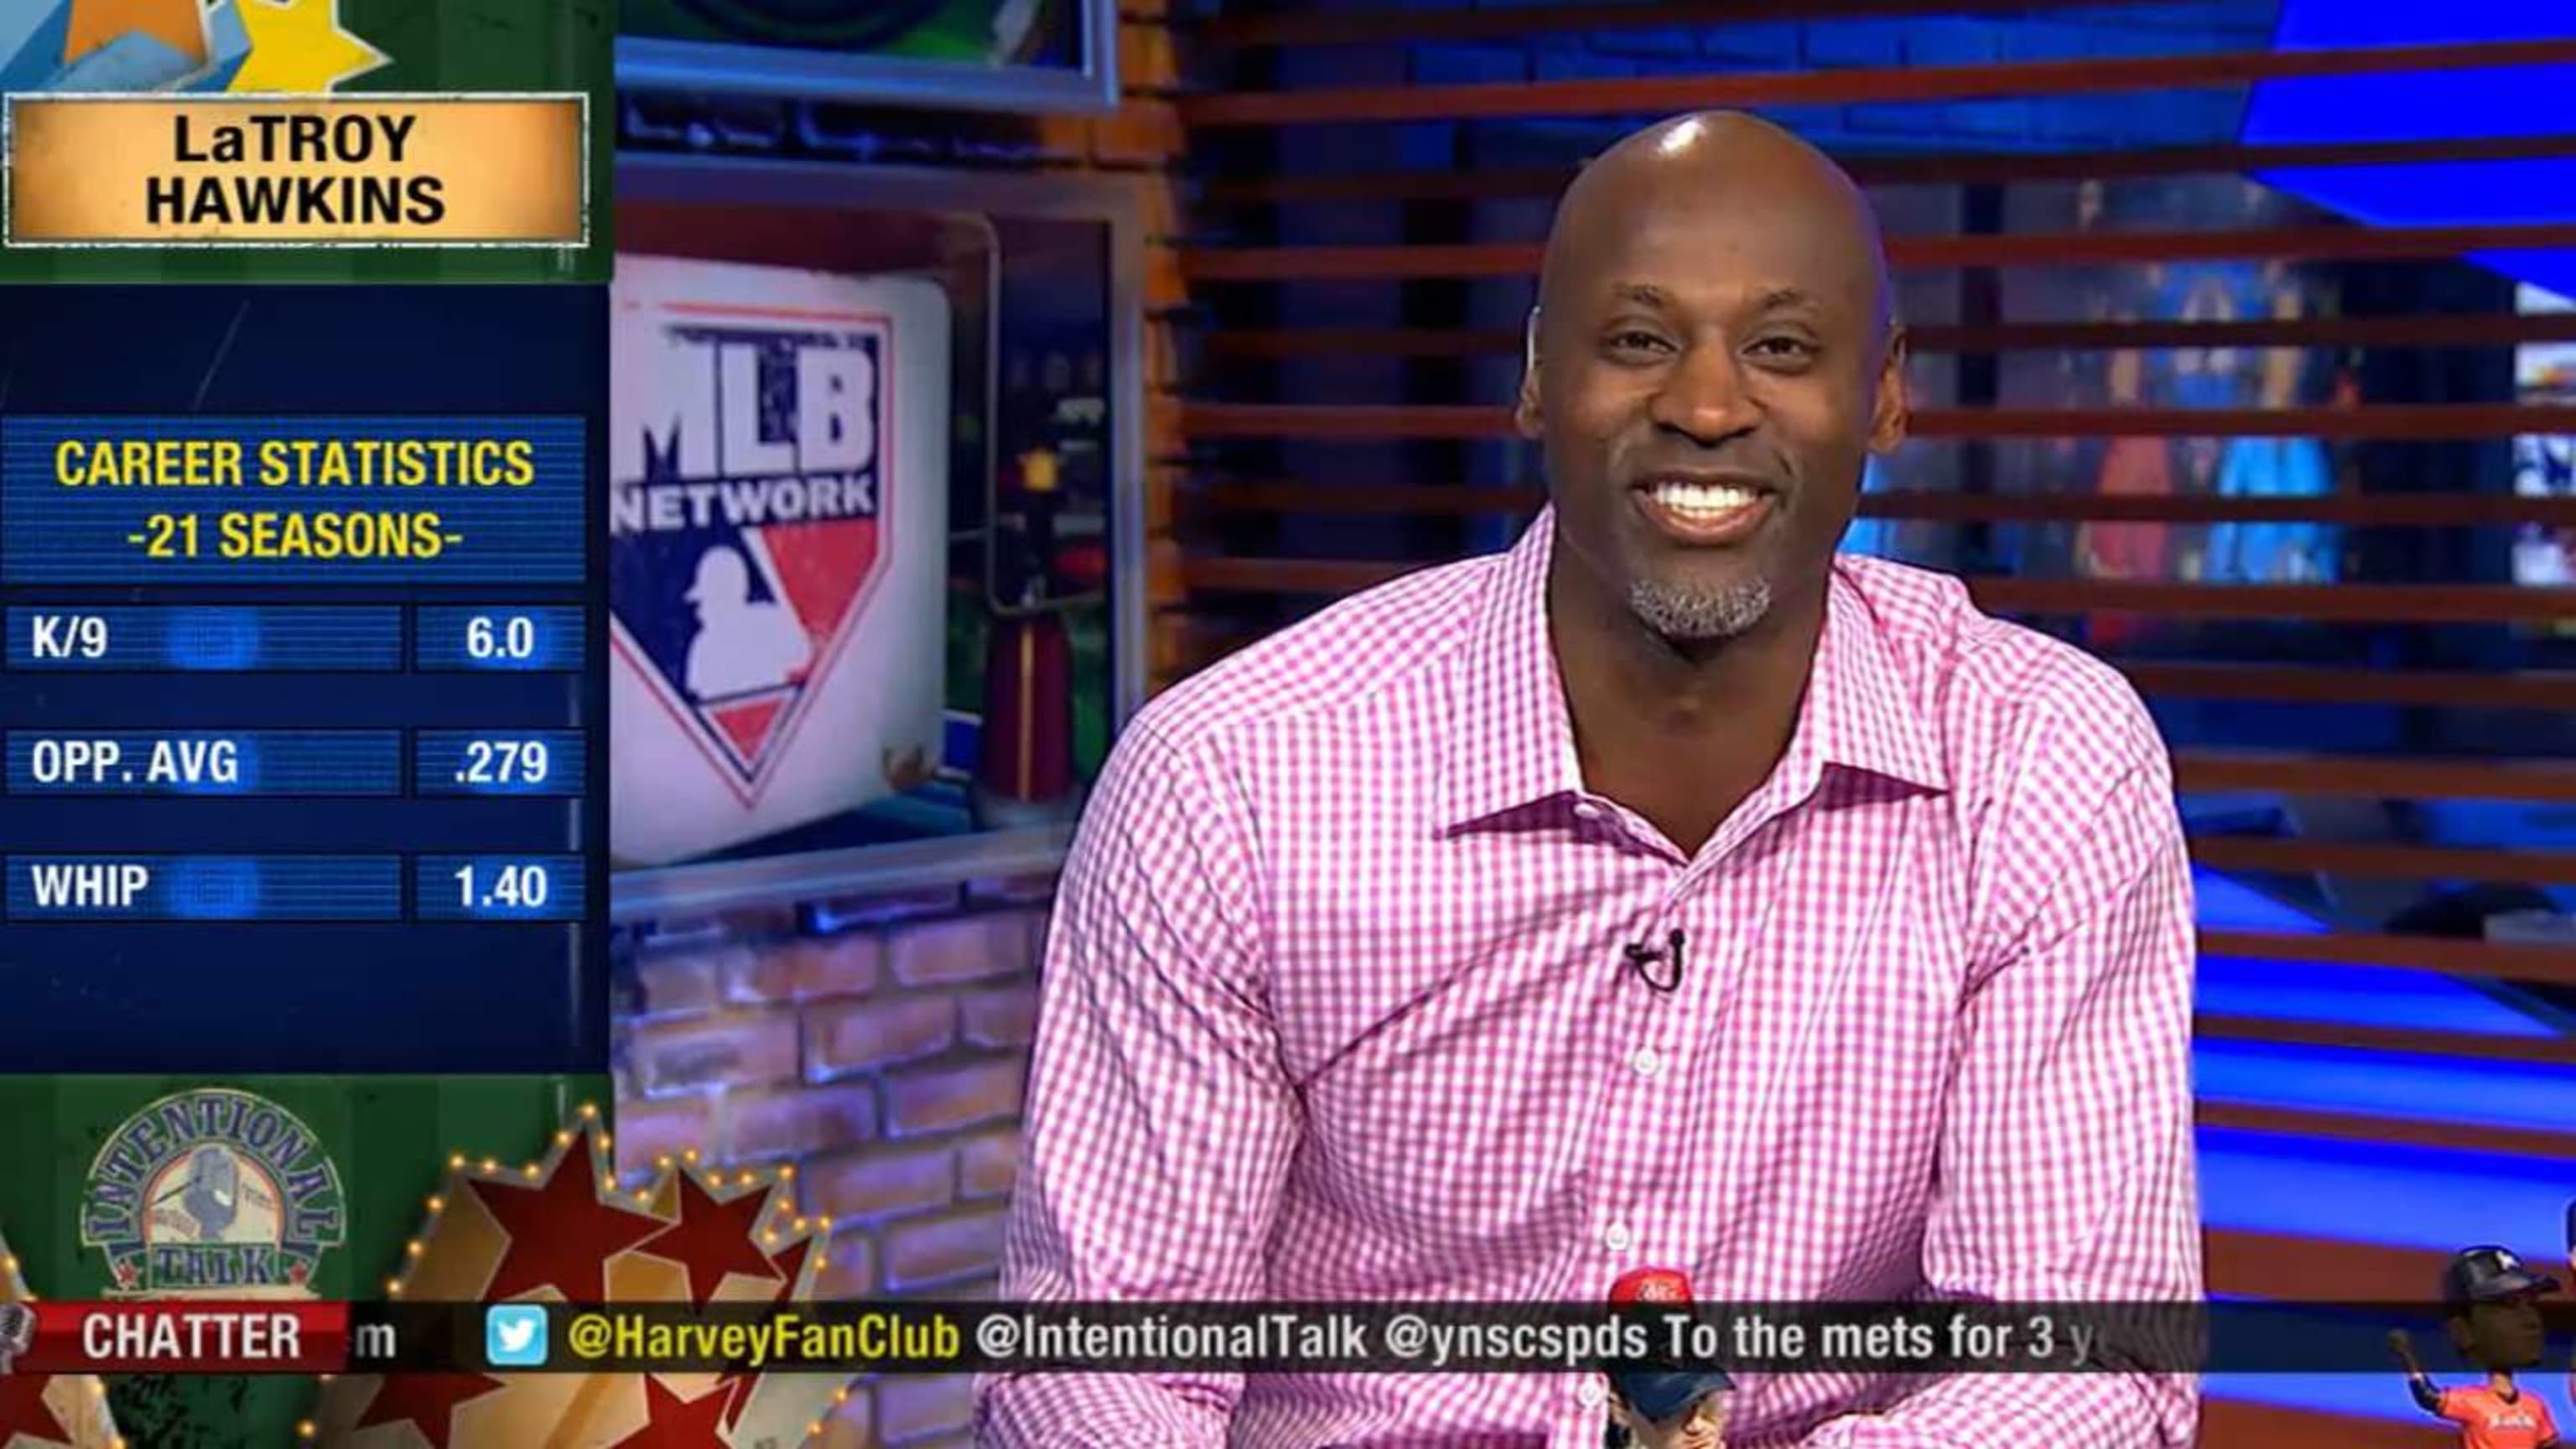 LaTroy Hawkins dishes on all-time favorites